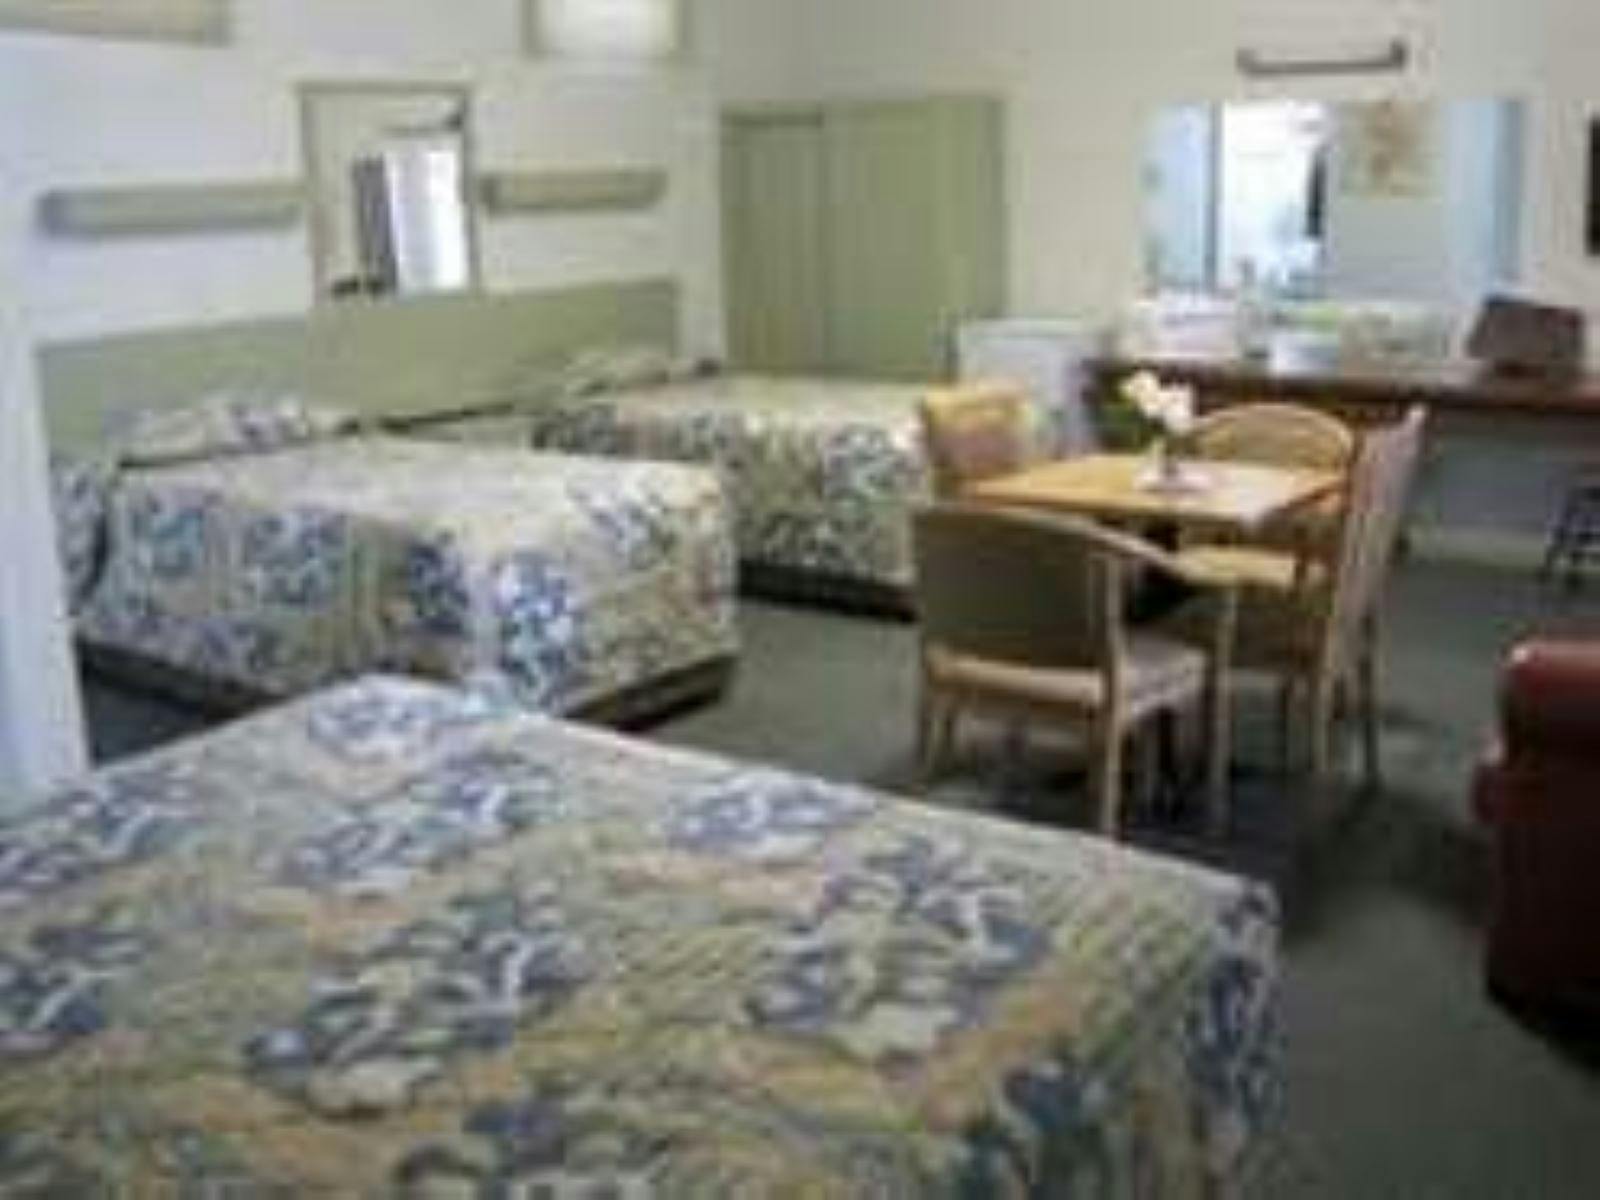 3 Bed Room at Holbrook Skye Hotel with table in the middle